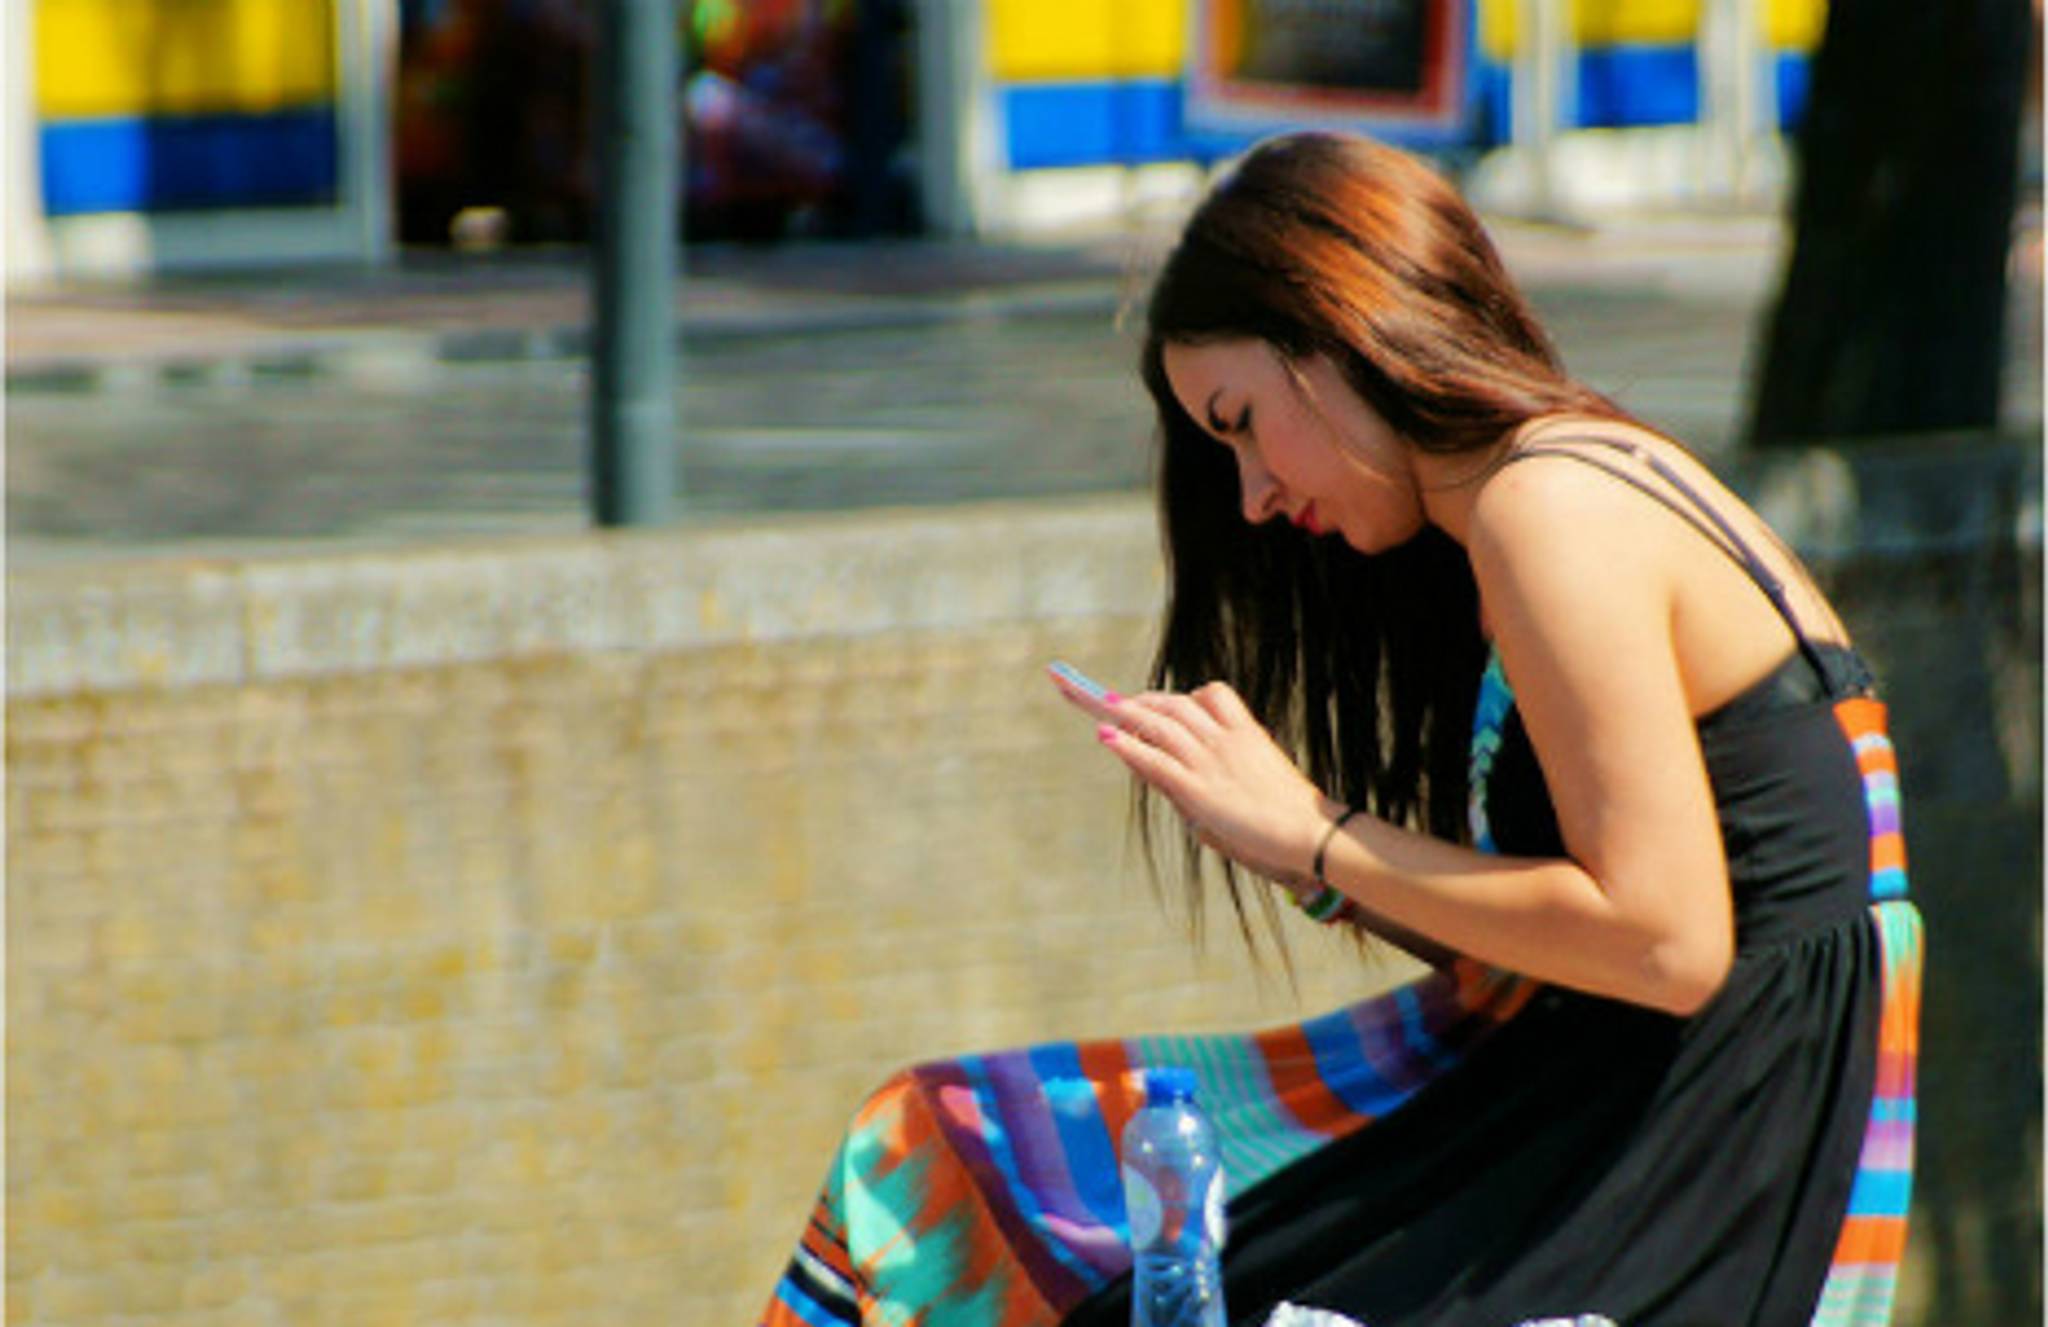 Brits love shopping on their smartphones